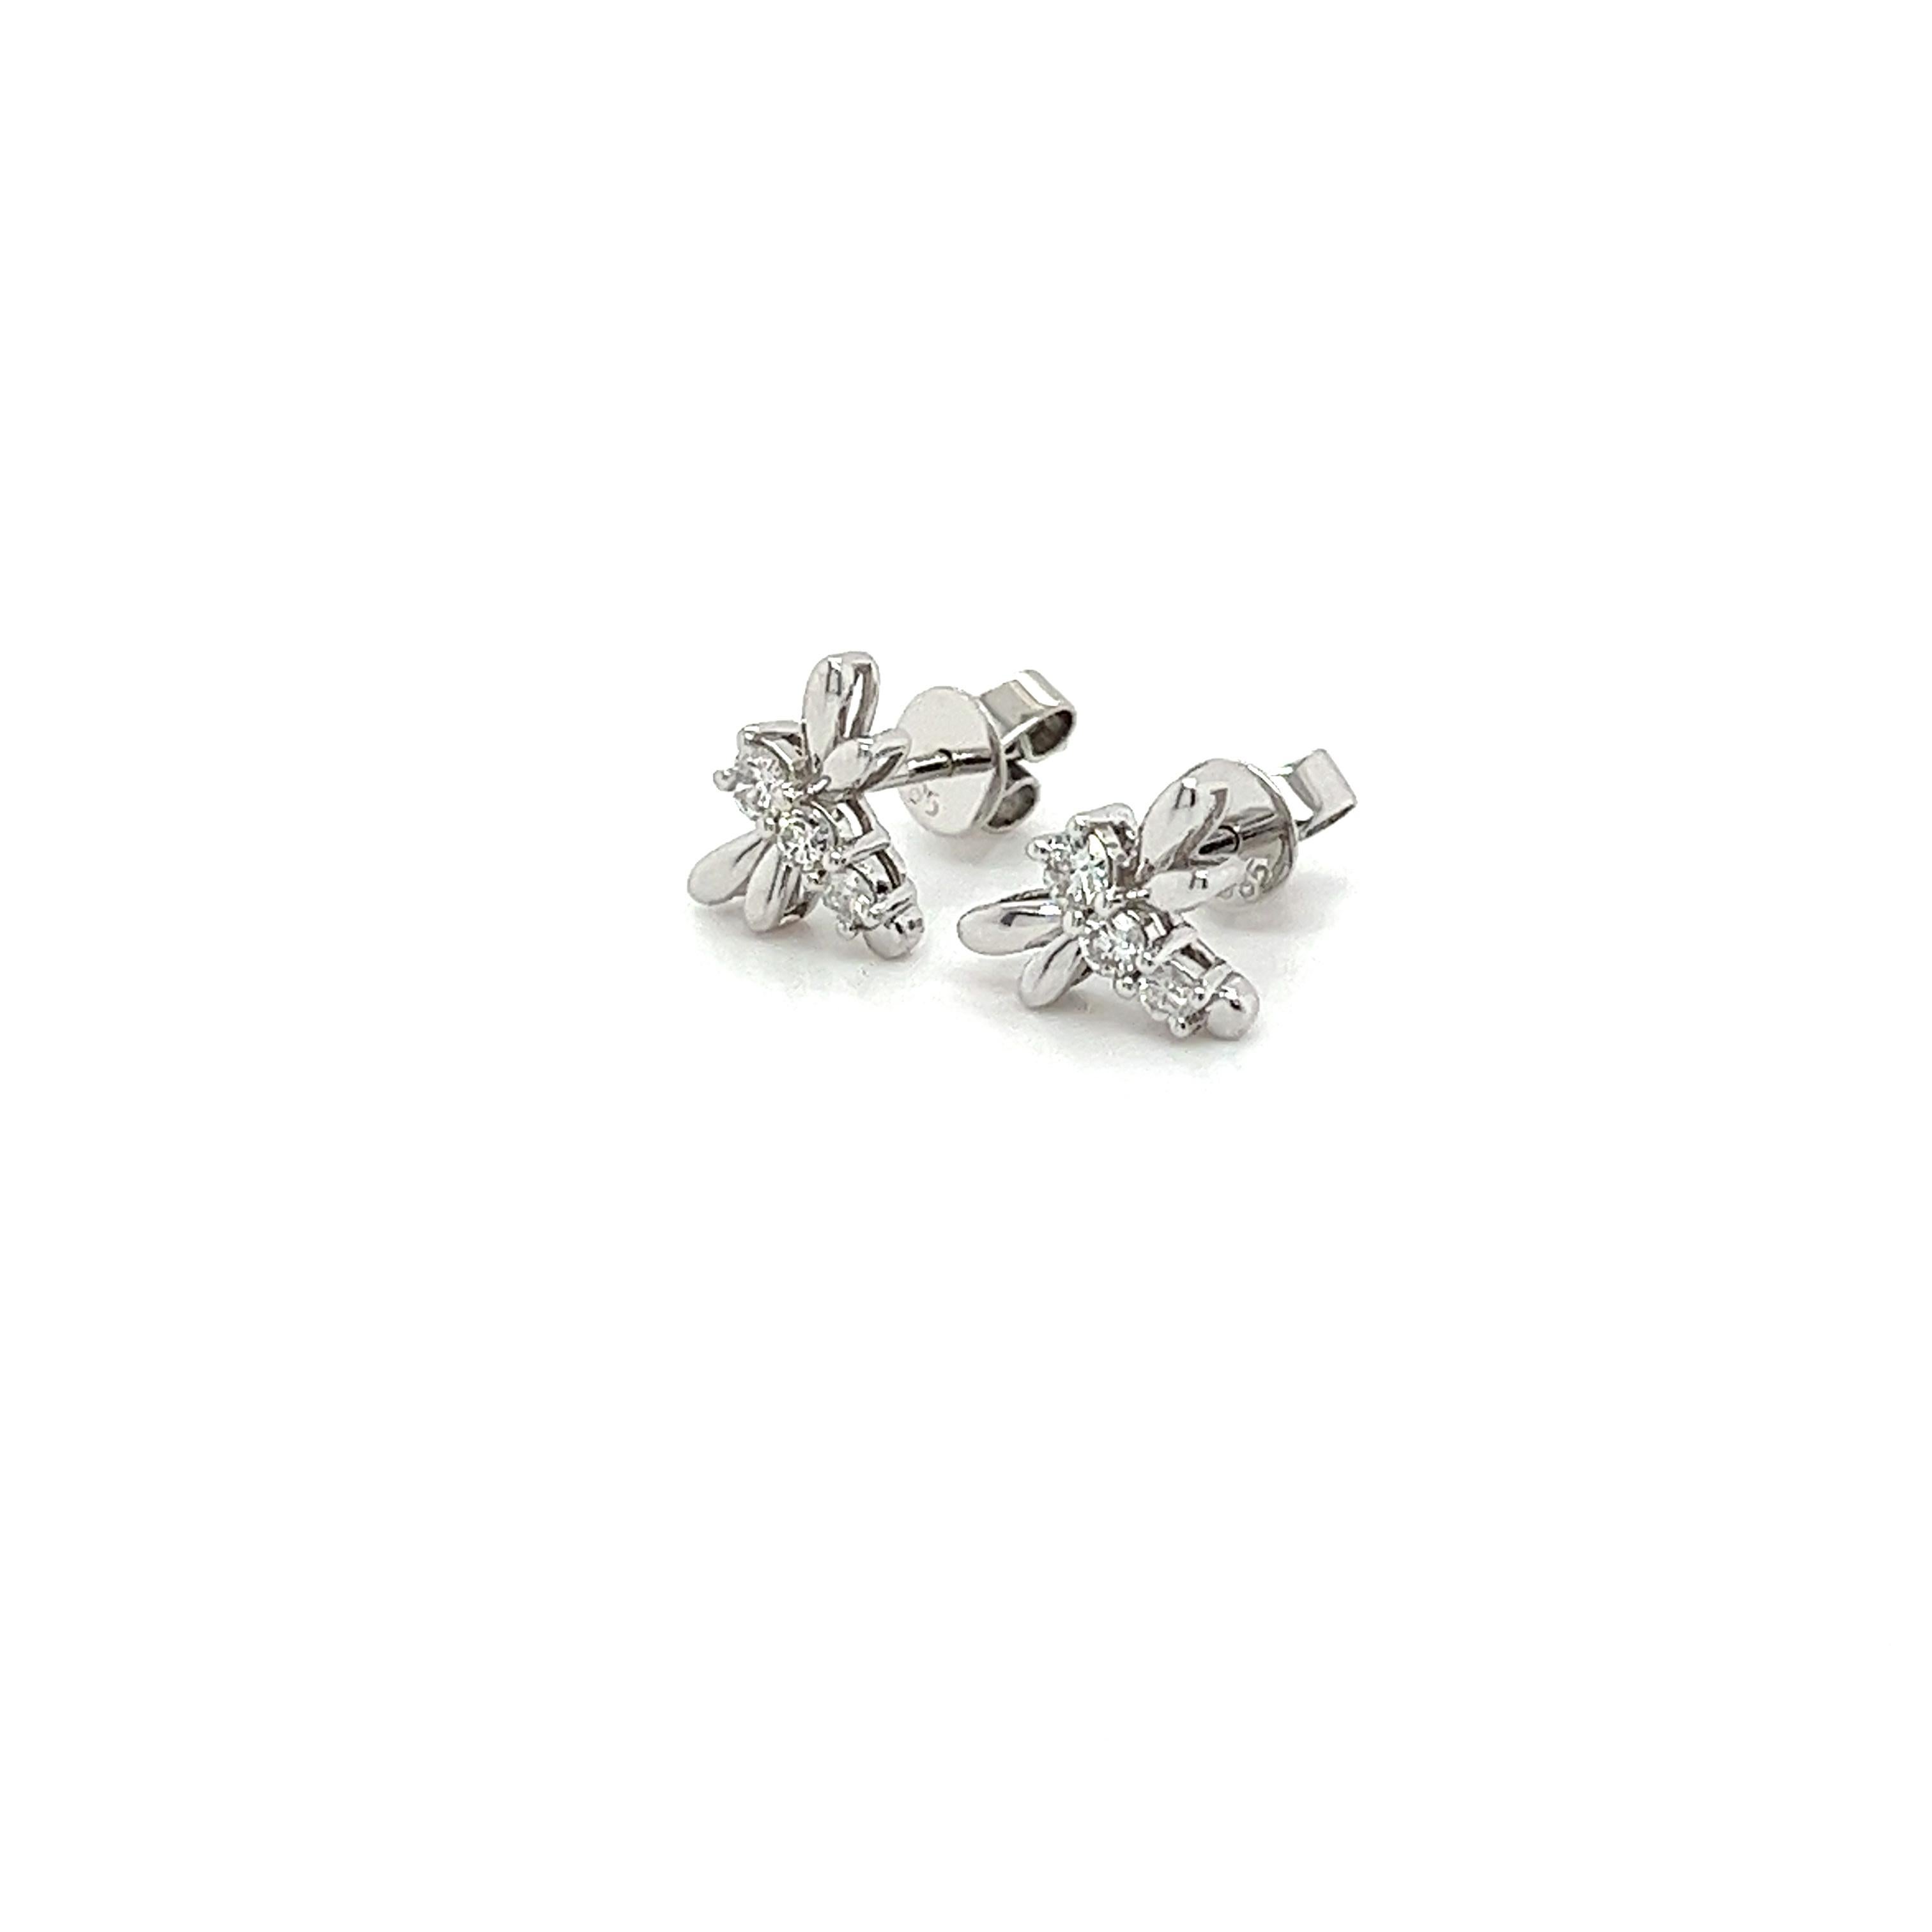 Natural round cut diamond Dragonfly stud earrings set in 14-karat solid white gold. Safely mounted with a strong push-back closure and 2 tightness levels for additional flexibility and security. Carat weight and gold kt stamped. 

100% water-proof.